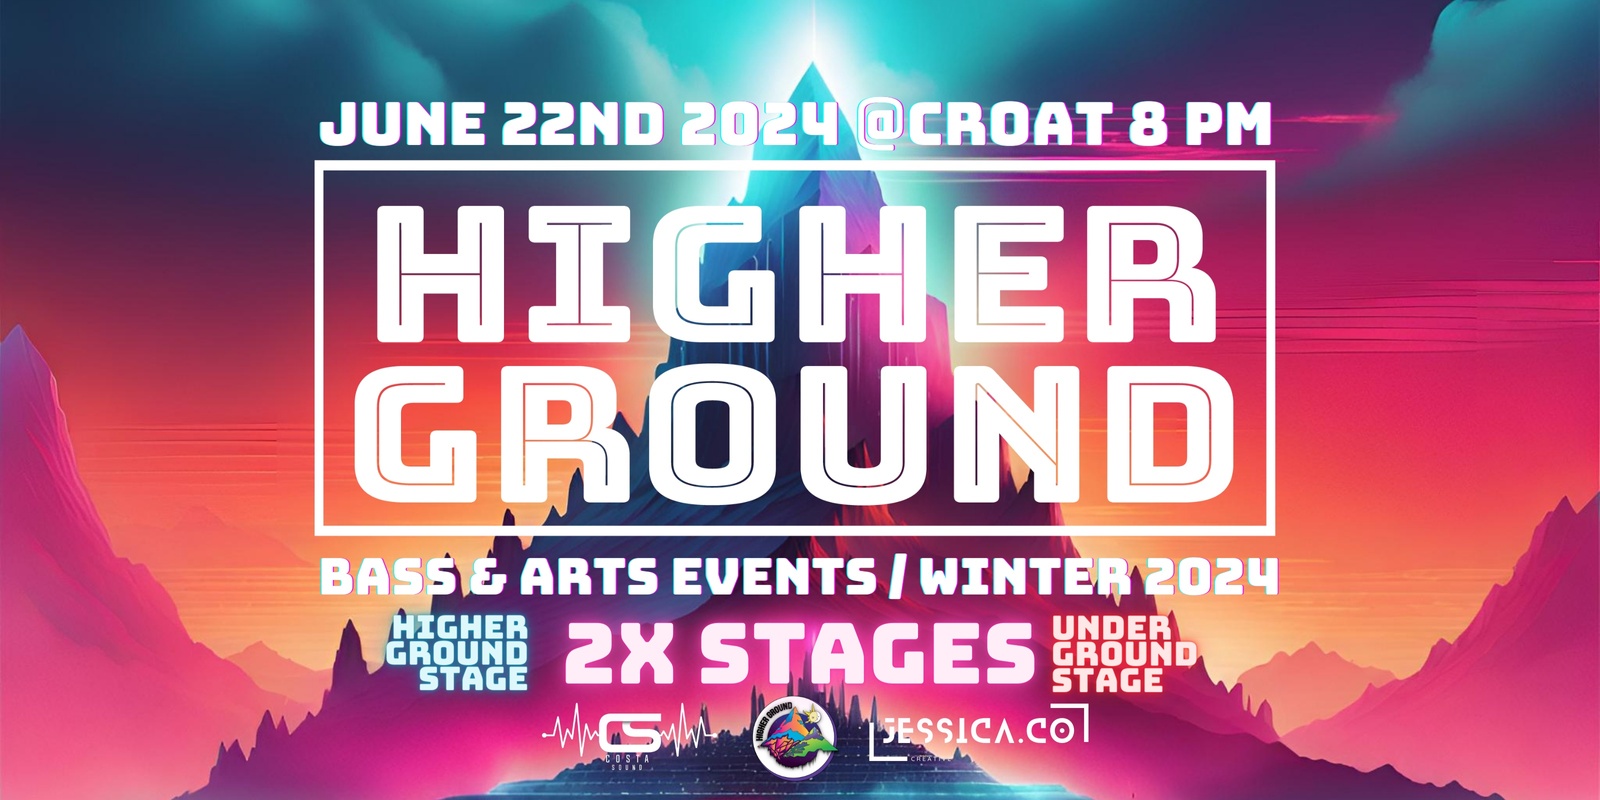 Banner image for HIGHER GROUND: BASS & ARTS EVENTS // WINTER 2024